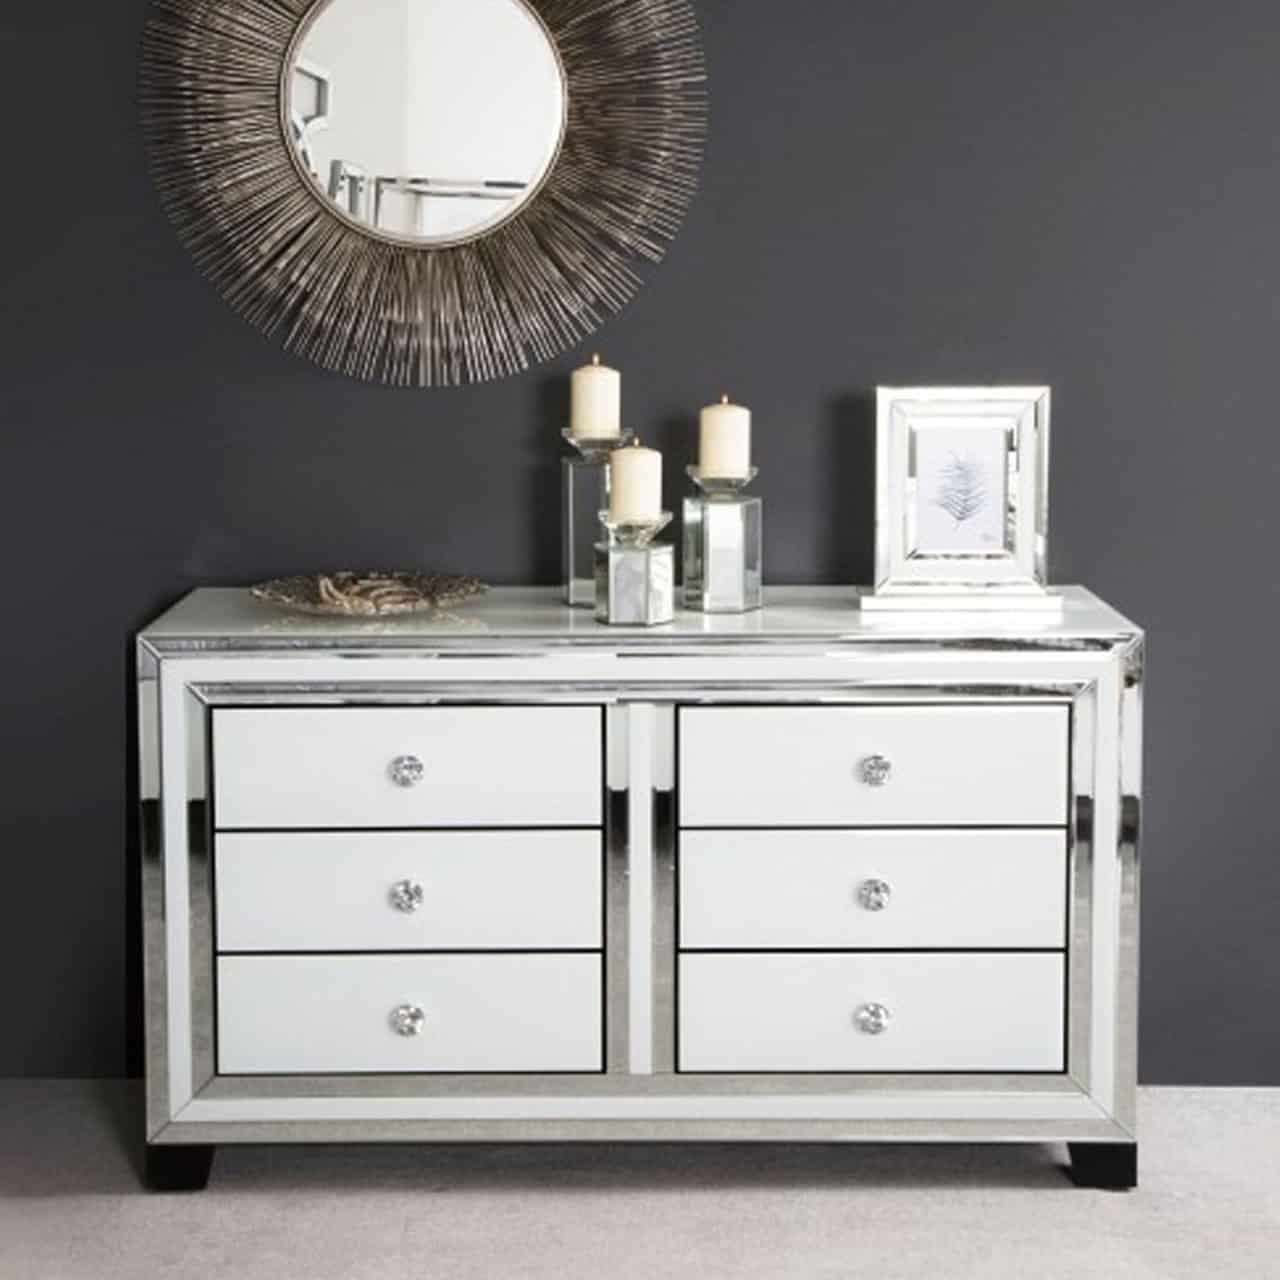 Softy Homes - Blanca Chest of Drawers